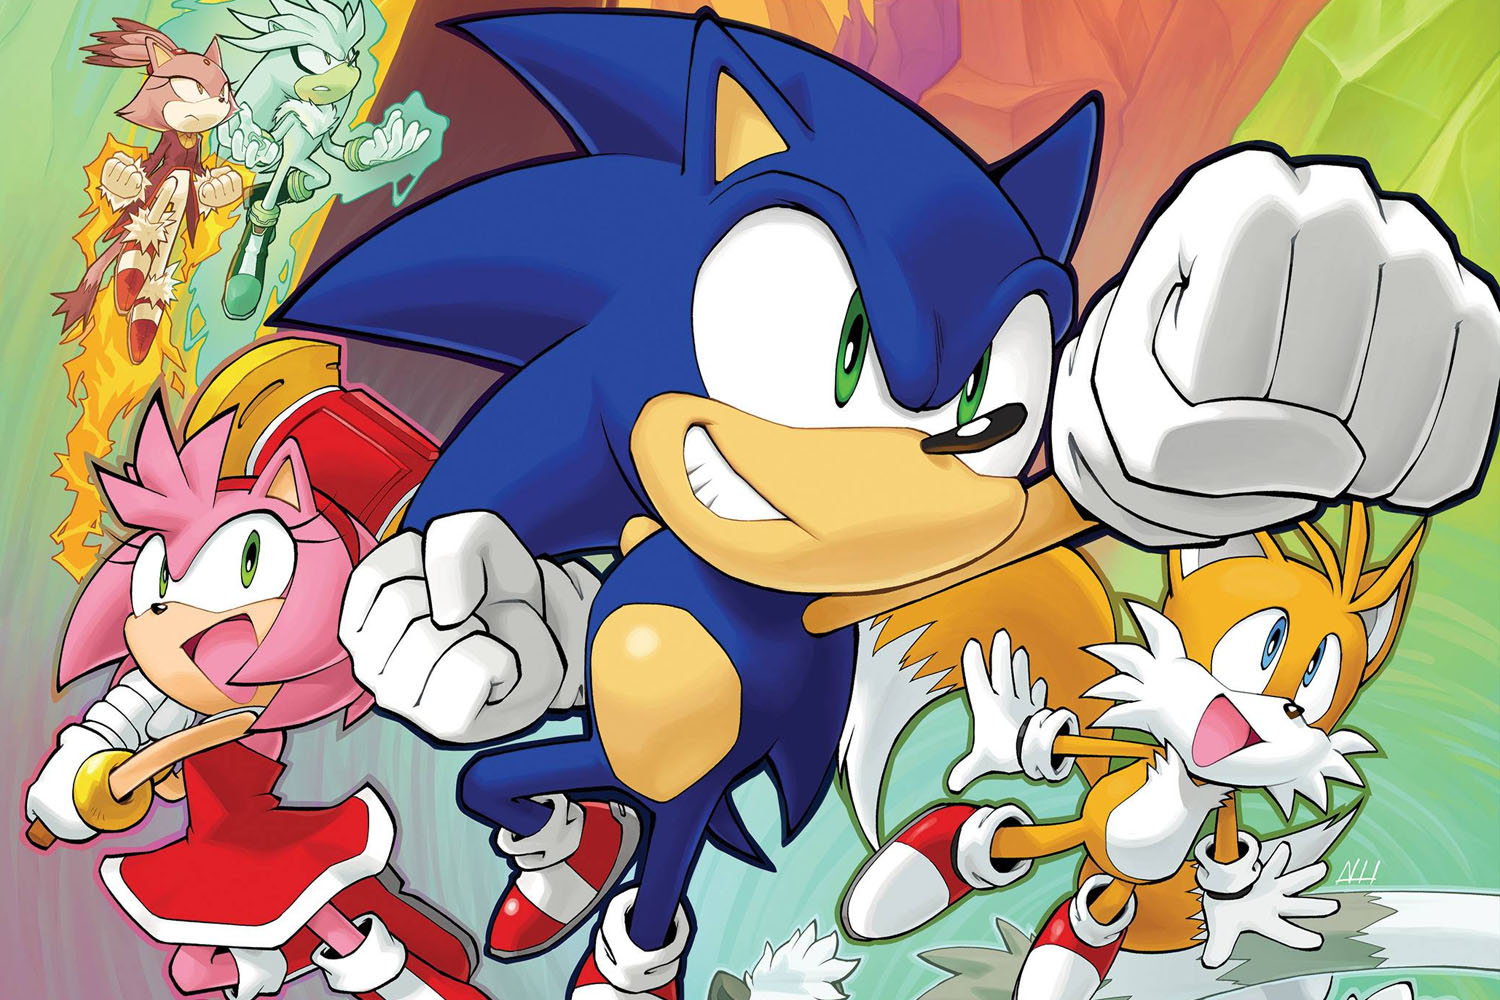 'Sonic the Hedgehog' #60 is an action-packed throwdown